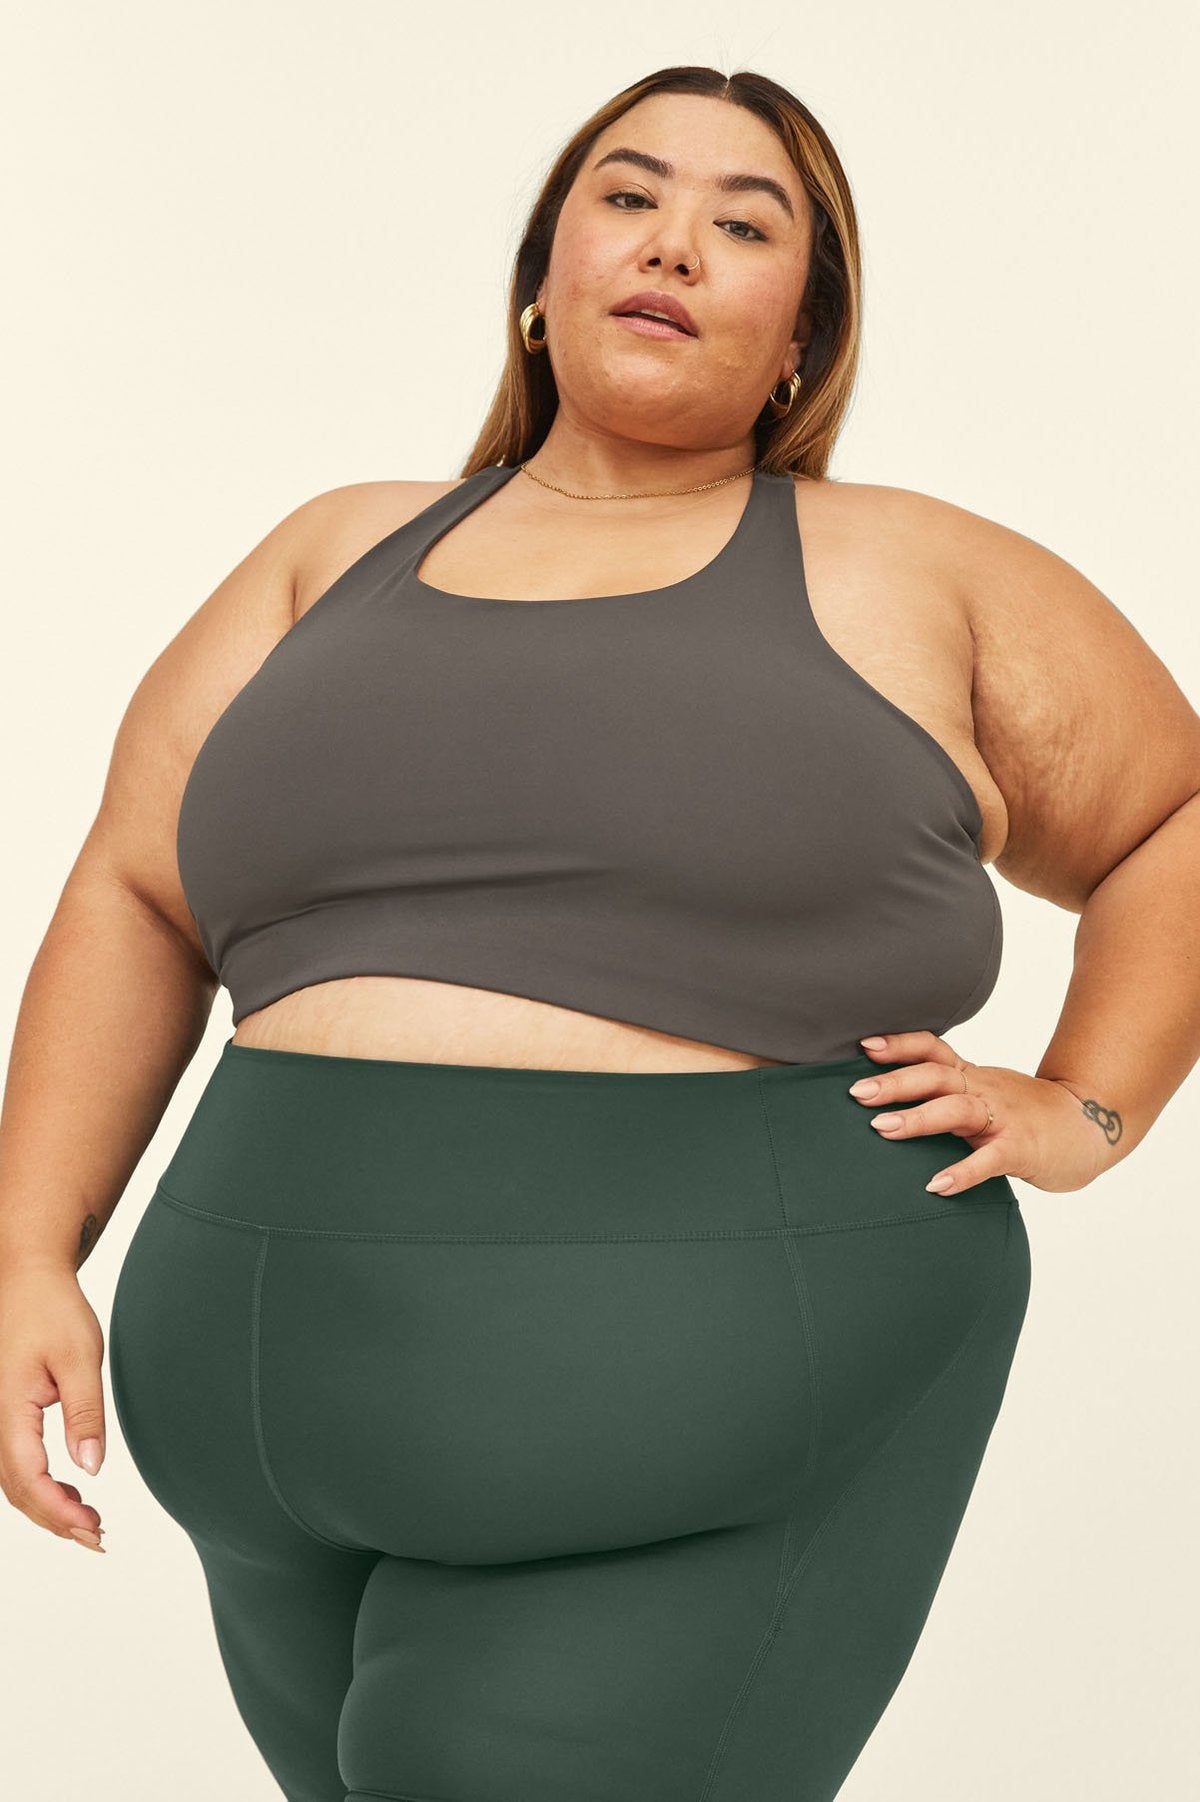 The Catch 22 Of Plus-Size Activewear